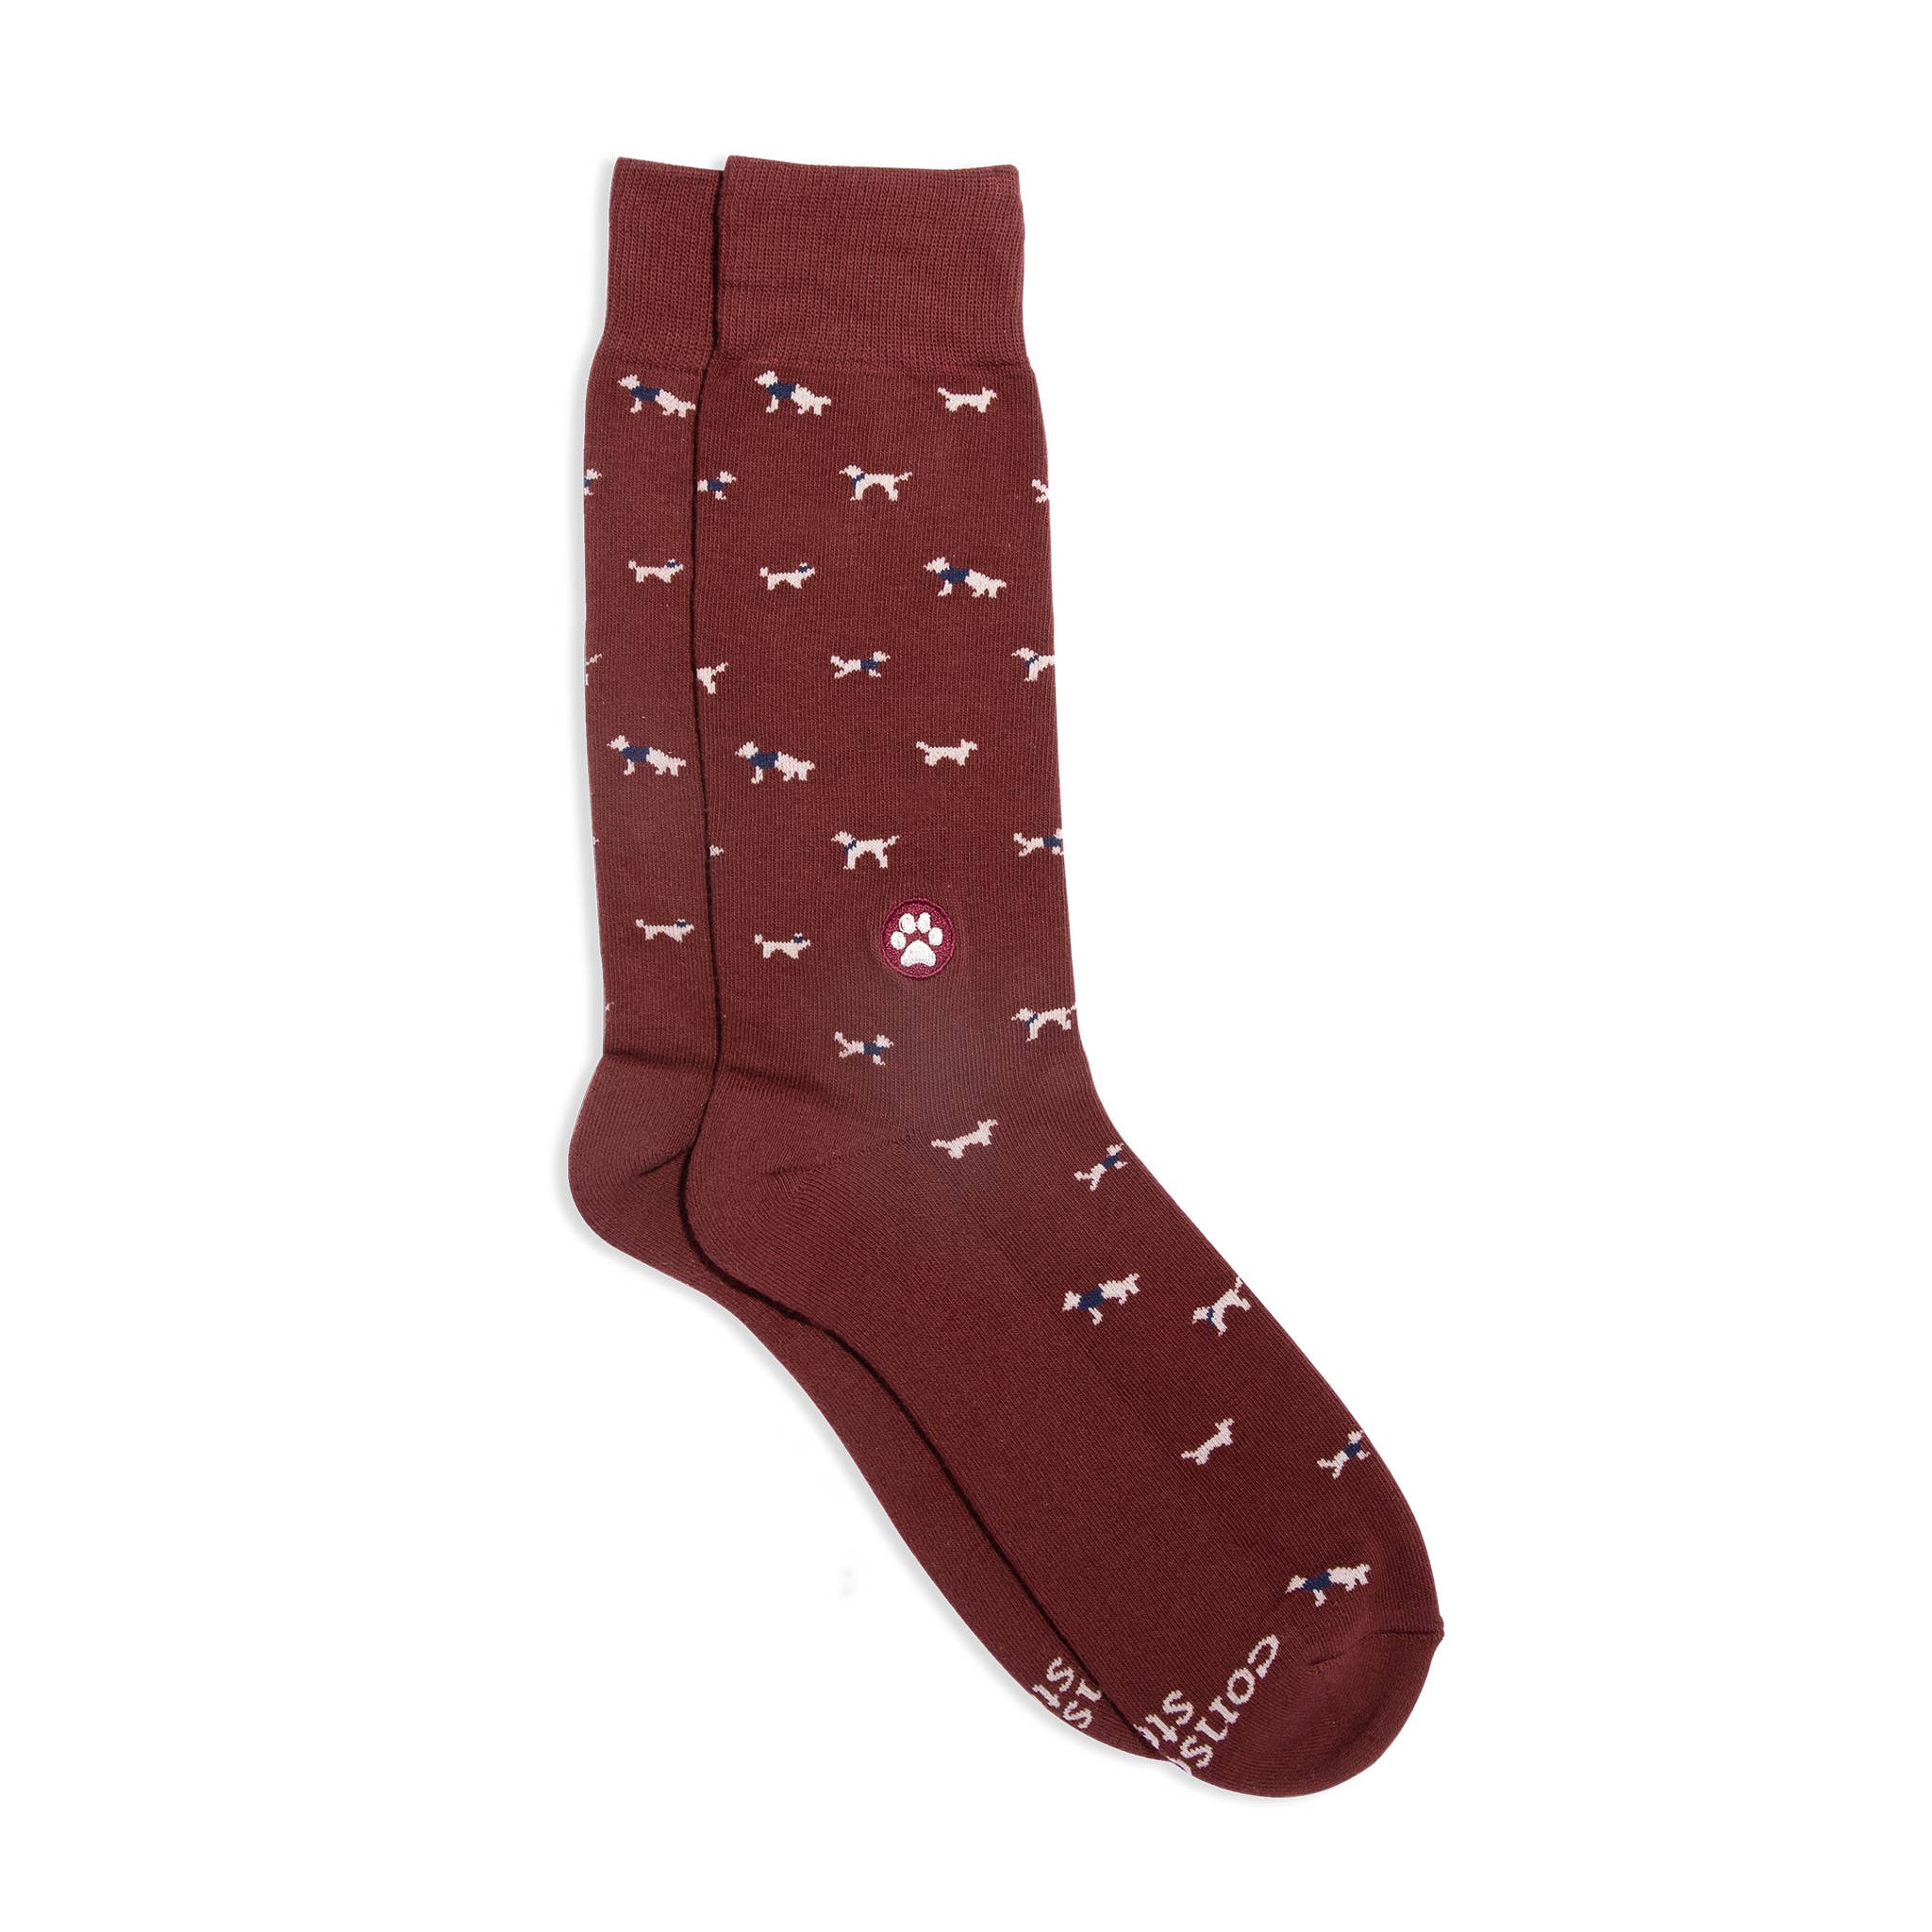 Socks that Save Dogs (Burgundy Dogs)